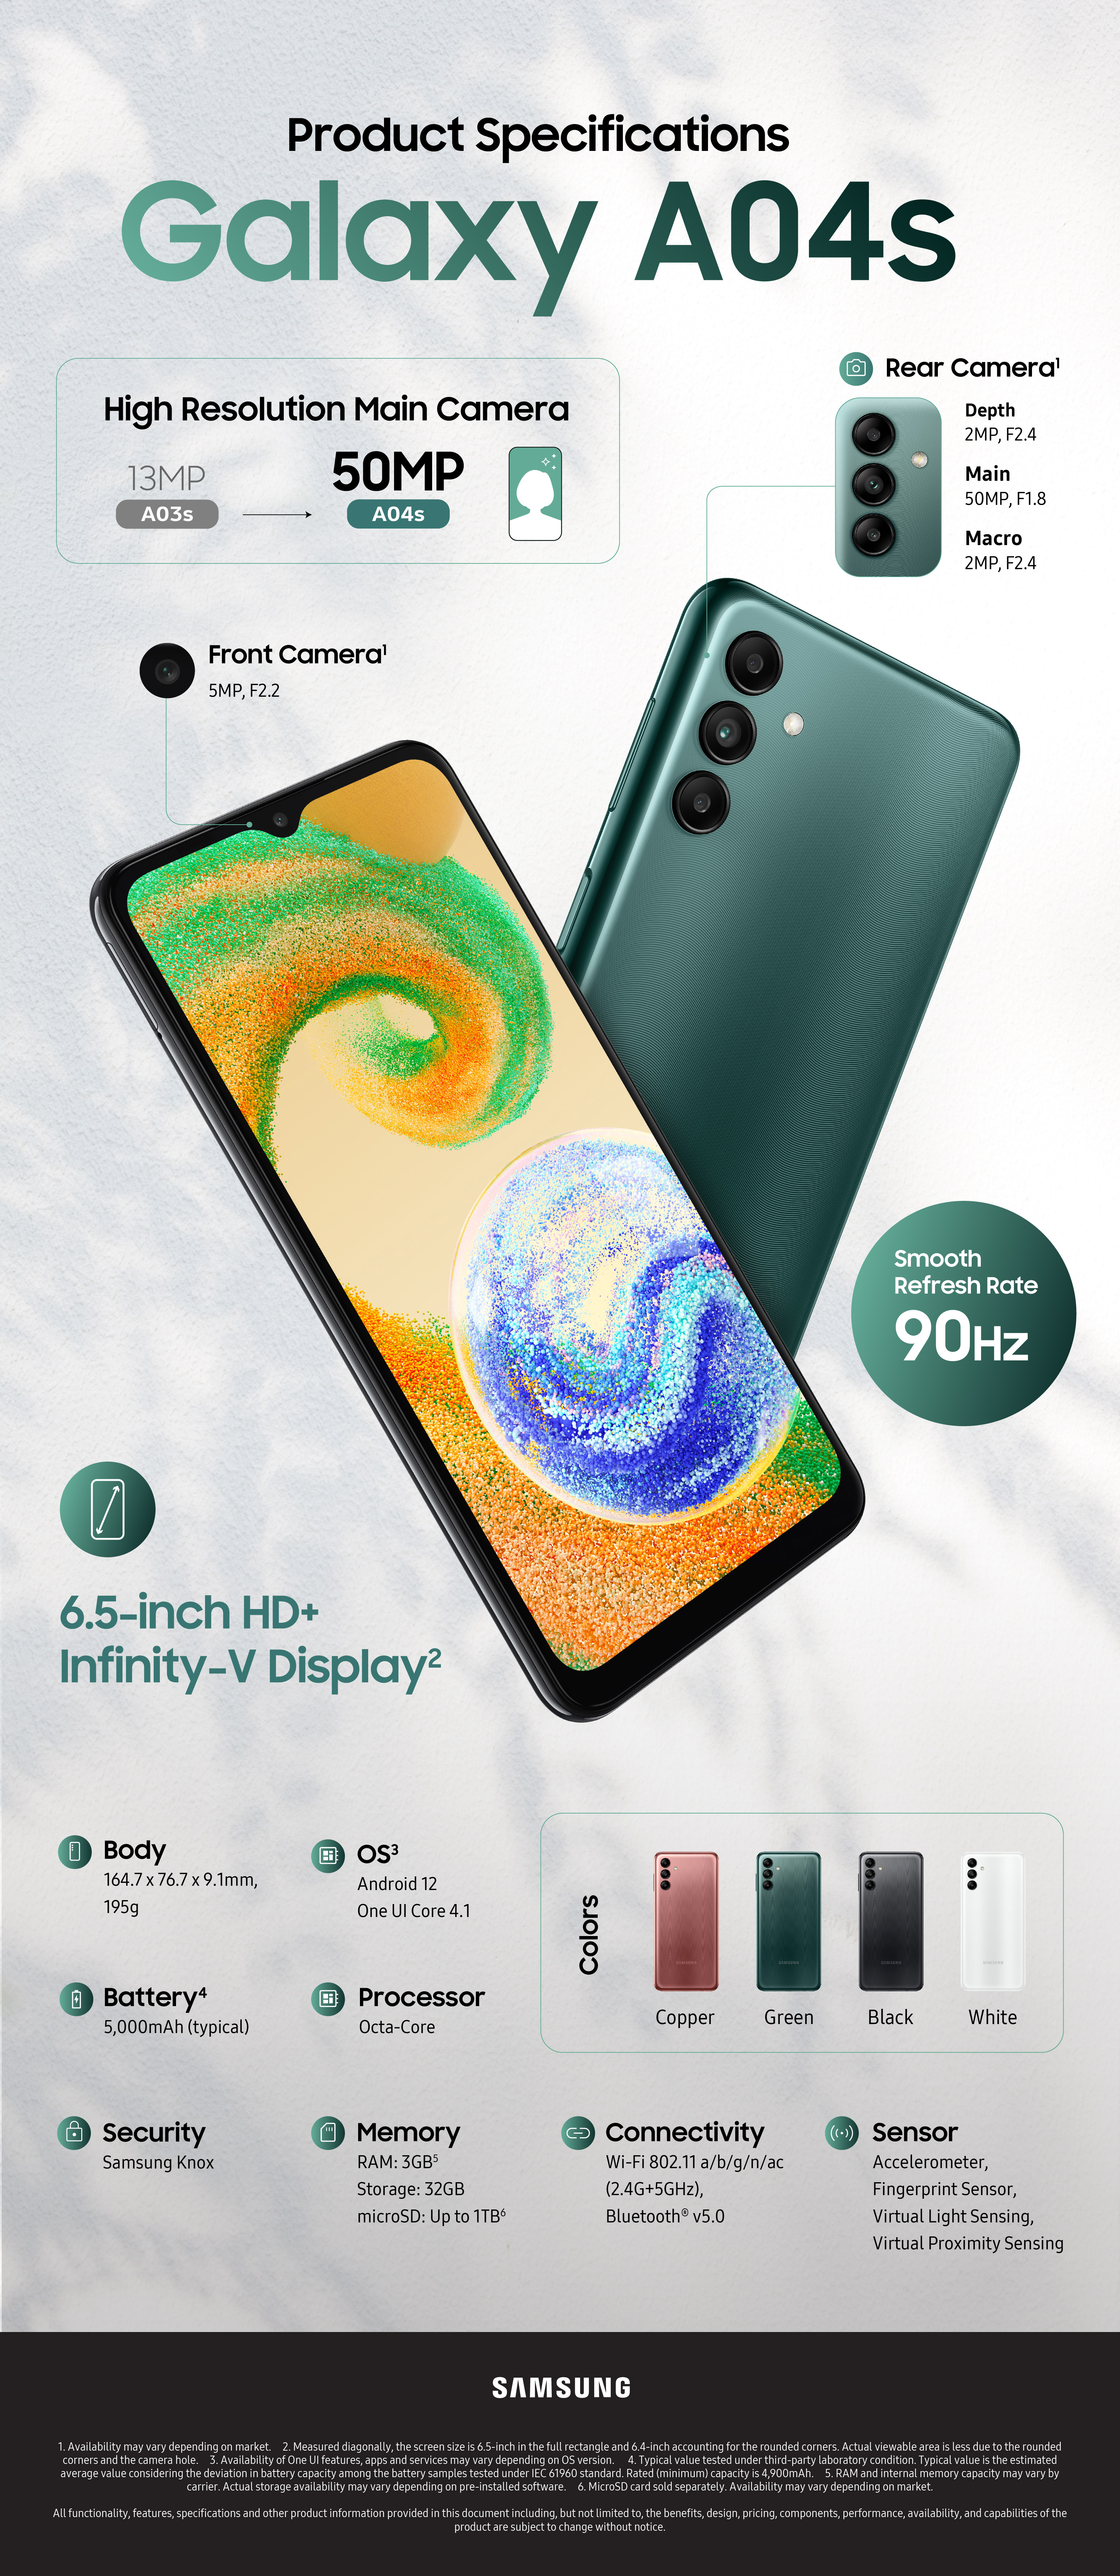 Galaxy A04s Product Specification Infographic